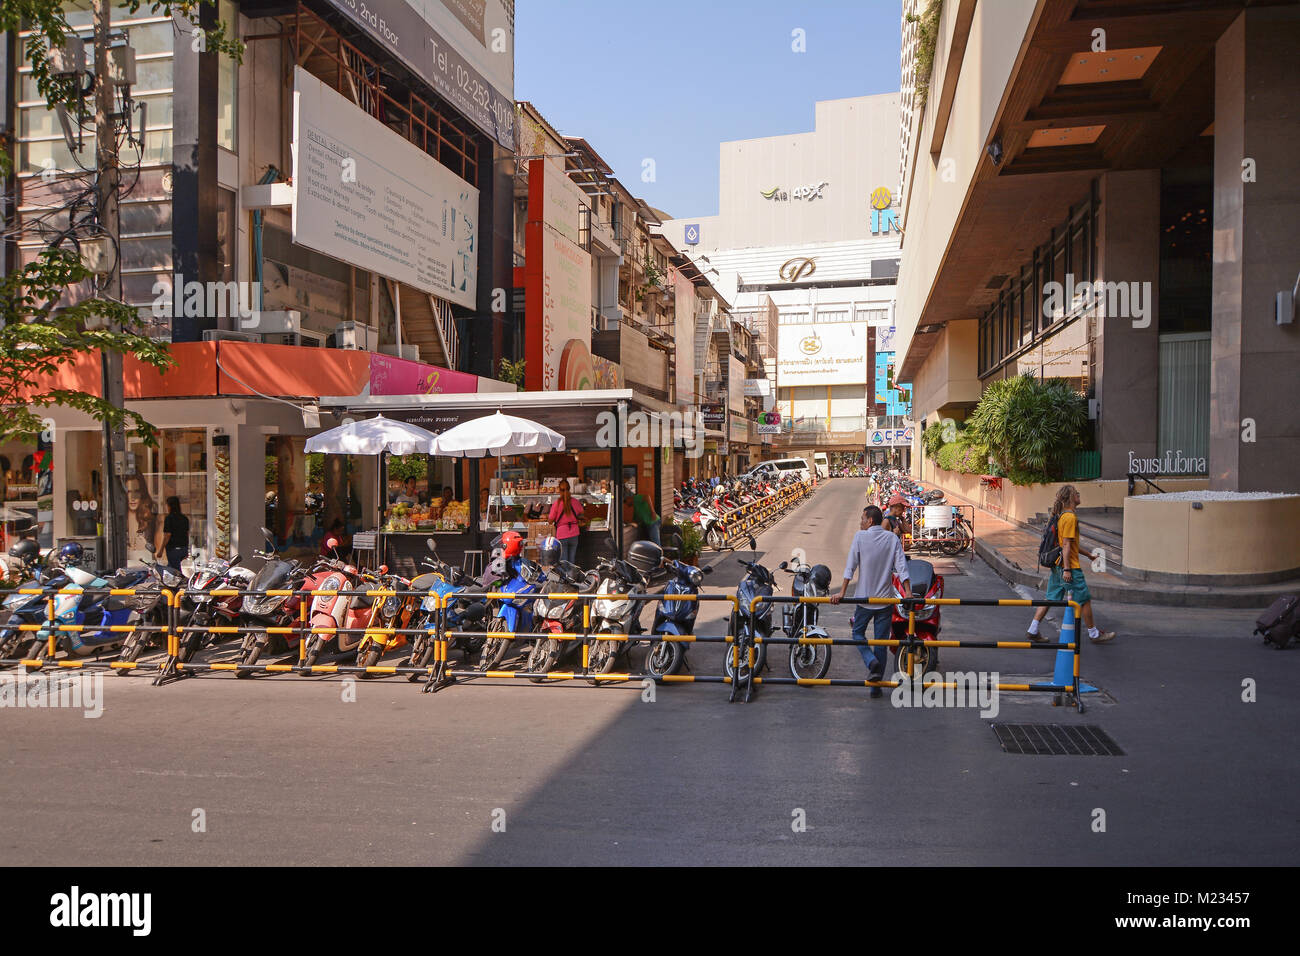 Bangkok, Siam Square, Thailand - January 4, 2016: Busy scooter parking and shopping streets in Siam commercial center in Thailand capital. Stock Photo